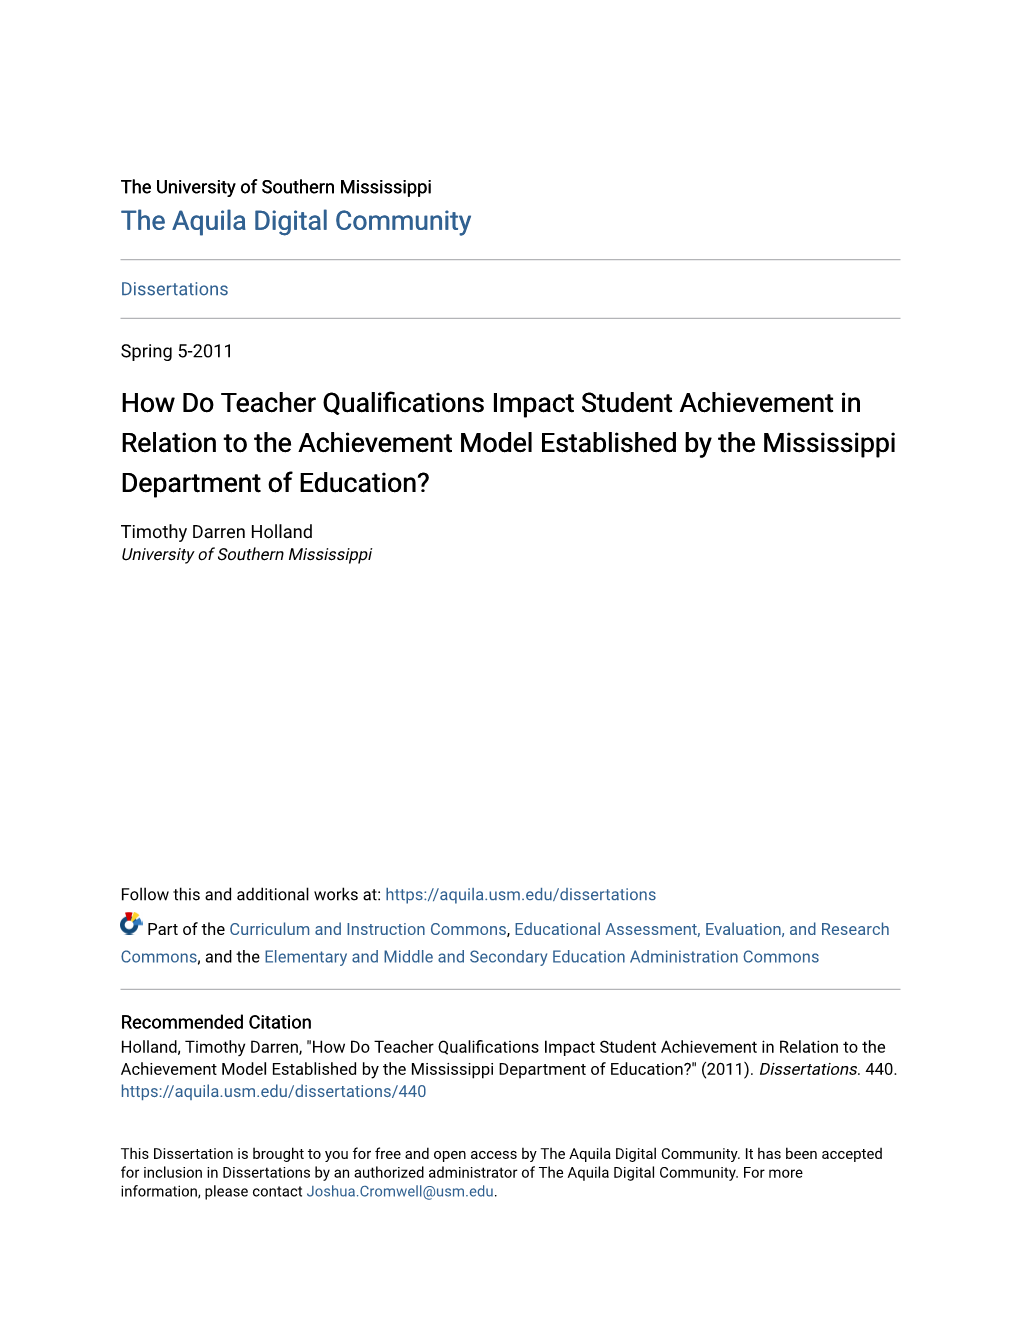 How Do Teacher Qualifications Impact Student Achievement in Relation to the Achievement Model Established by the Mississippi Department of Education?